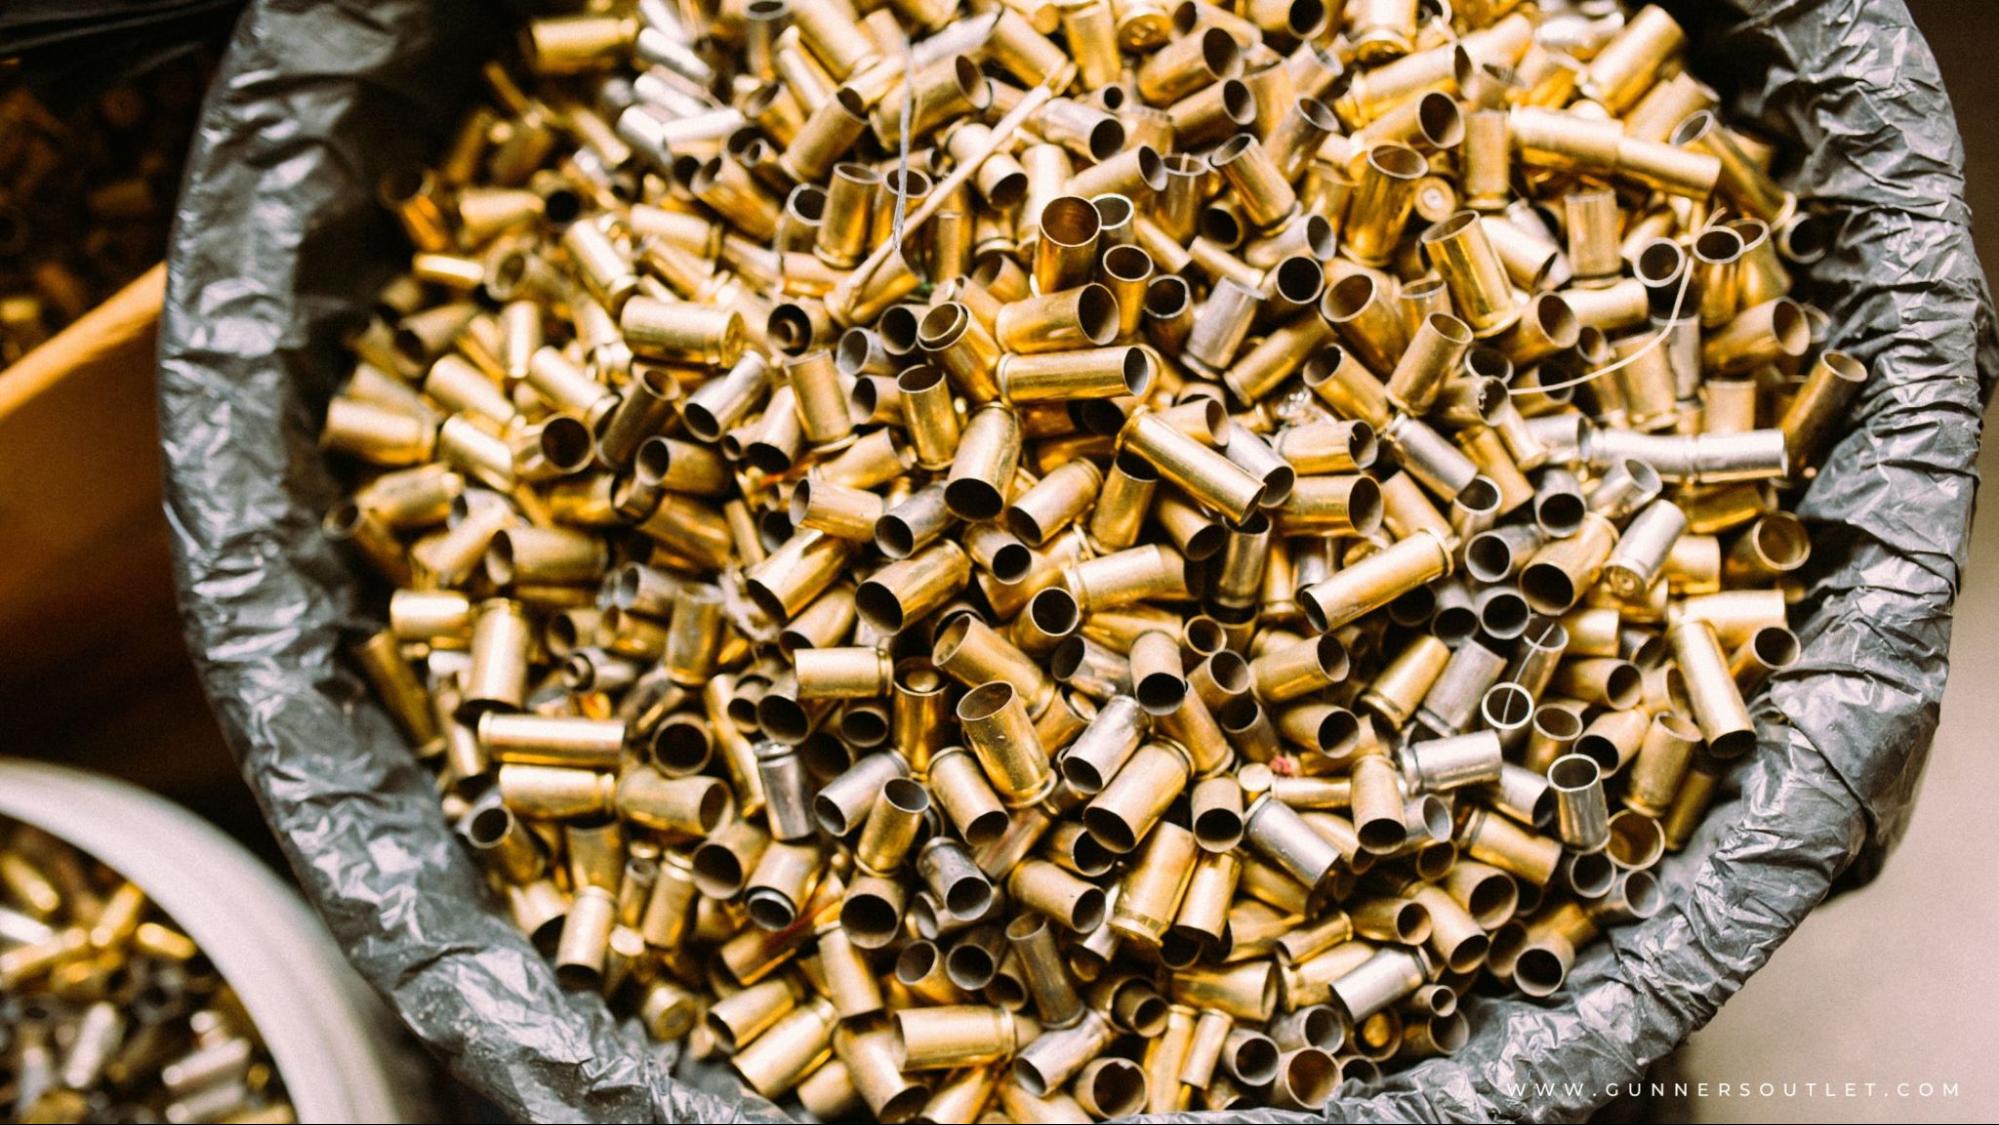 Where Do I Take My Scrap Brass Shells To Be Recycled Safely?